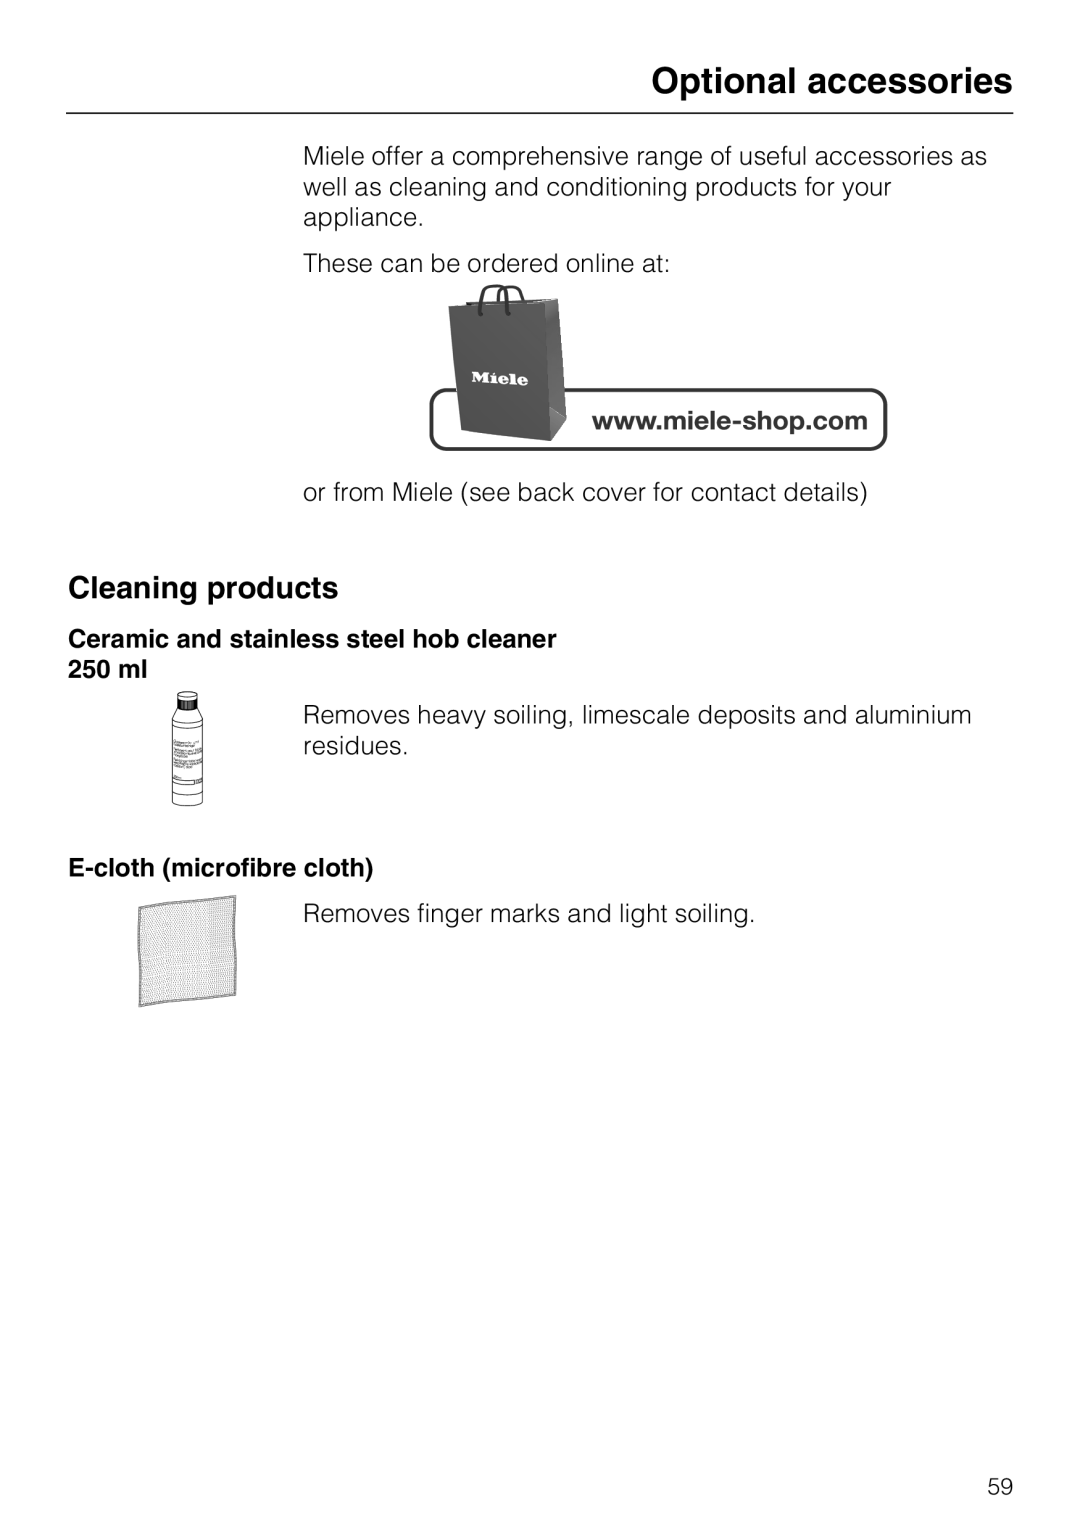 Miele 6203 Optional accessories, Cleaning products, Ceramic and stainless steel hob cleaner 250 ml, Cloth microfibre cloth 